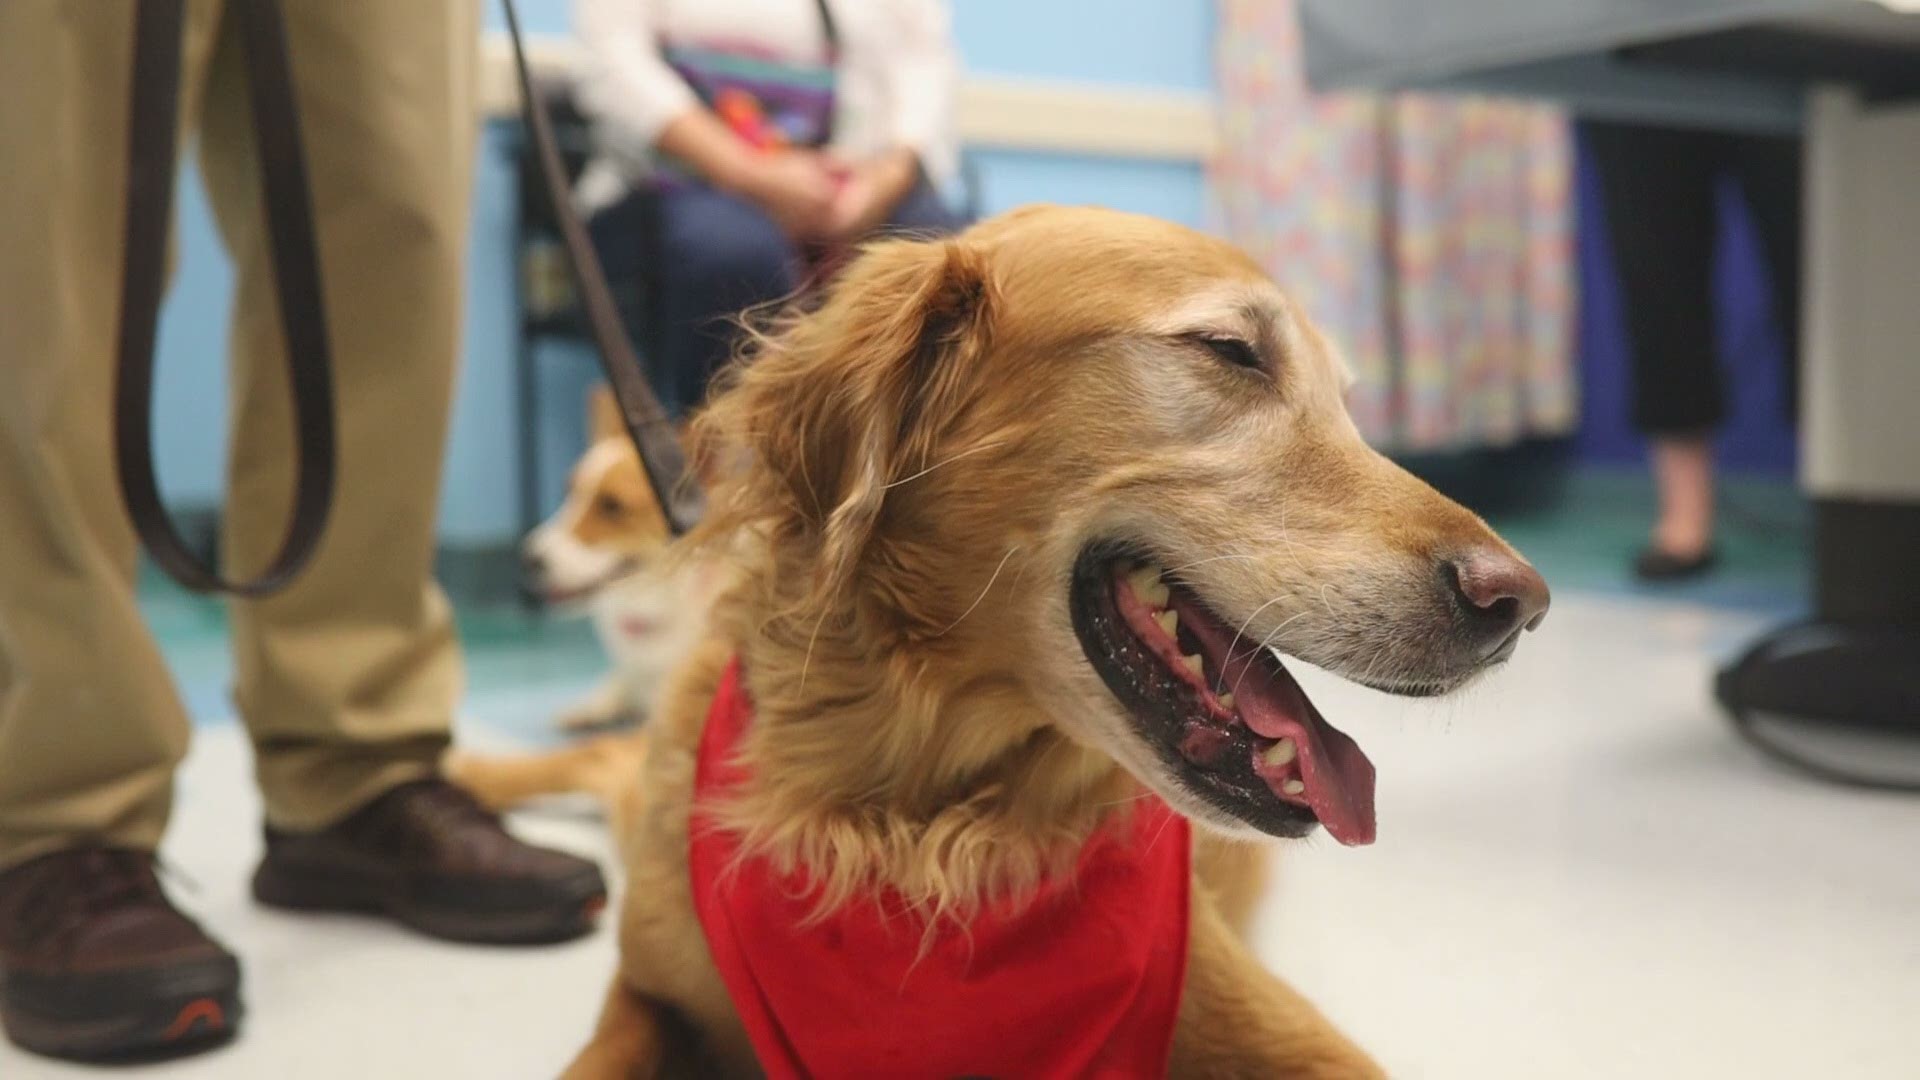 Riley, the therapy dog that put smiles on faces at Shriners Healthcare for Children, has reached a milestone of 300 visits.